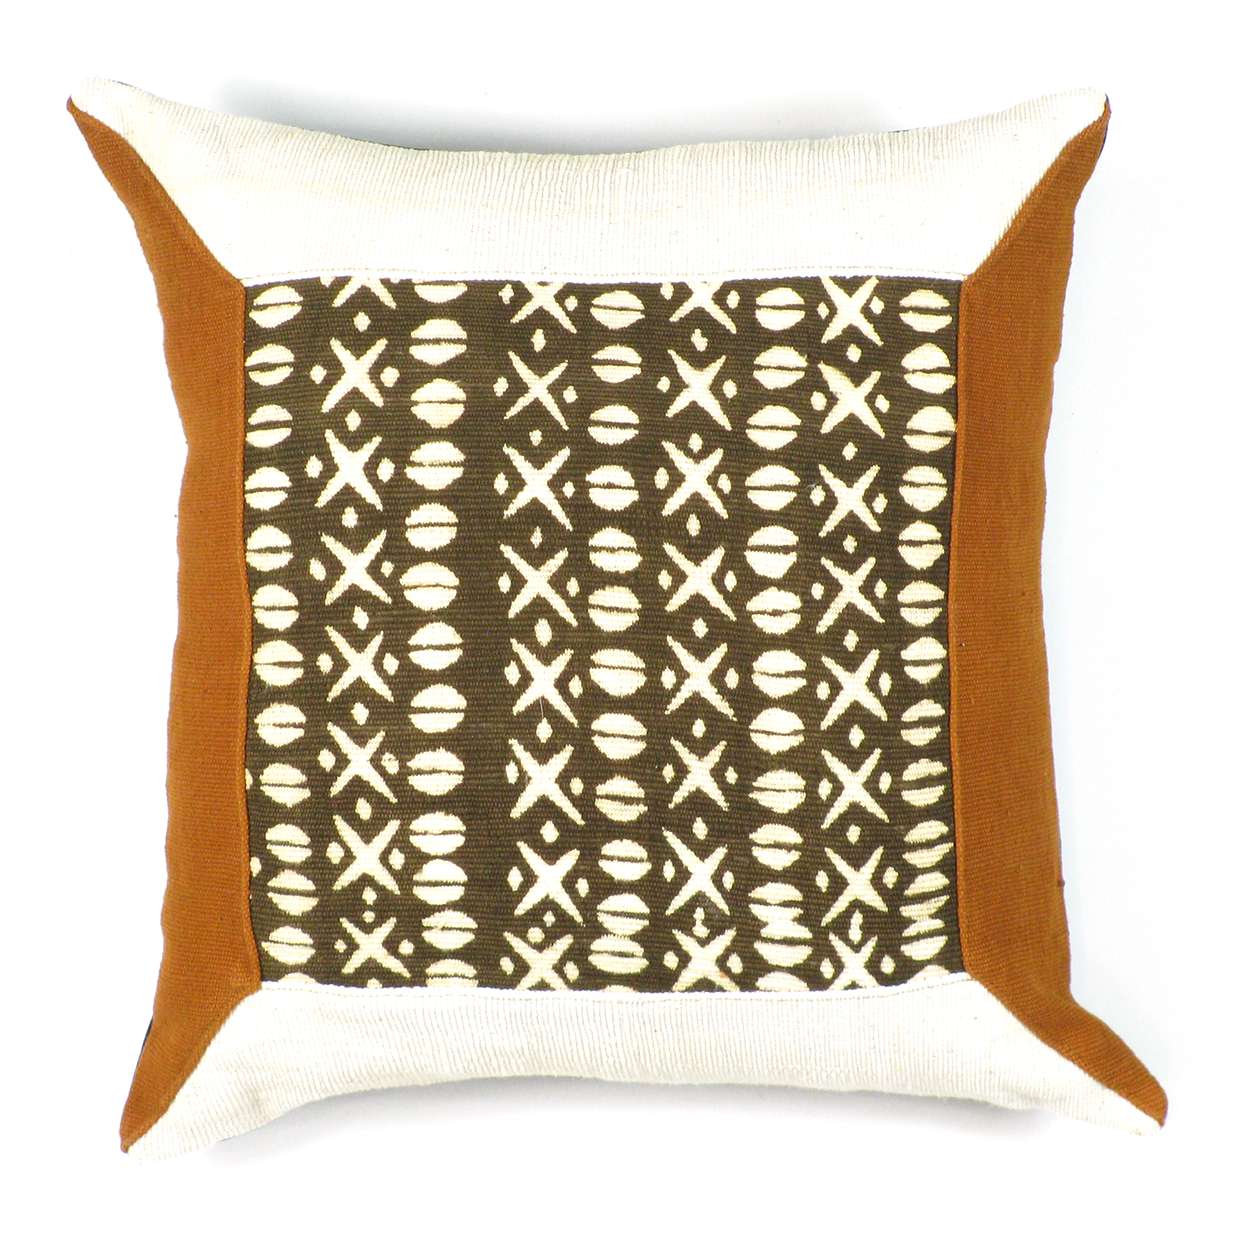 Hand Woven African 16 inch Pillow - Sea Shells - White and Rust